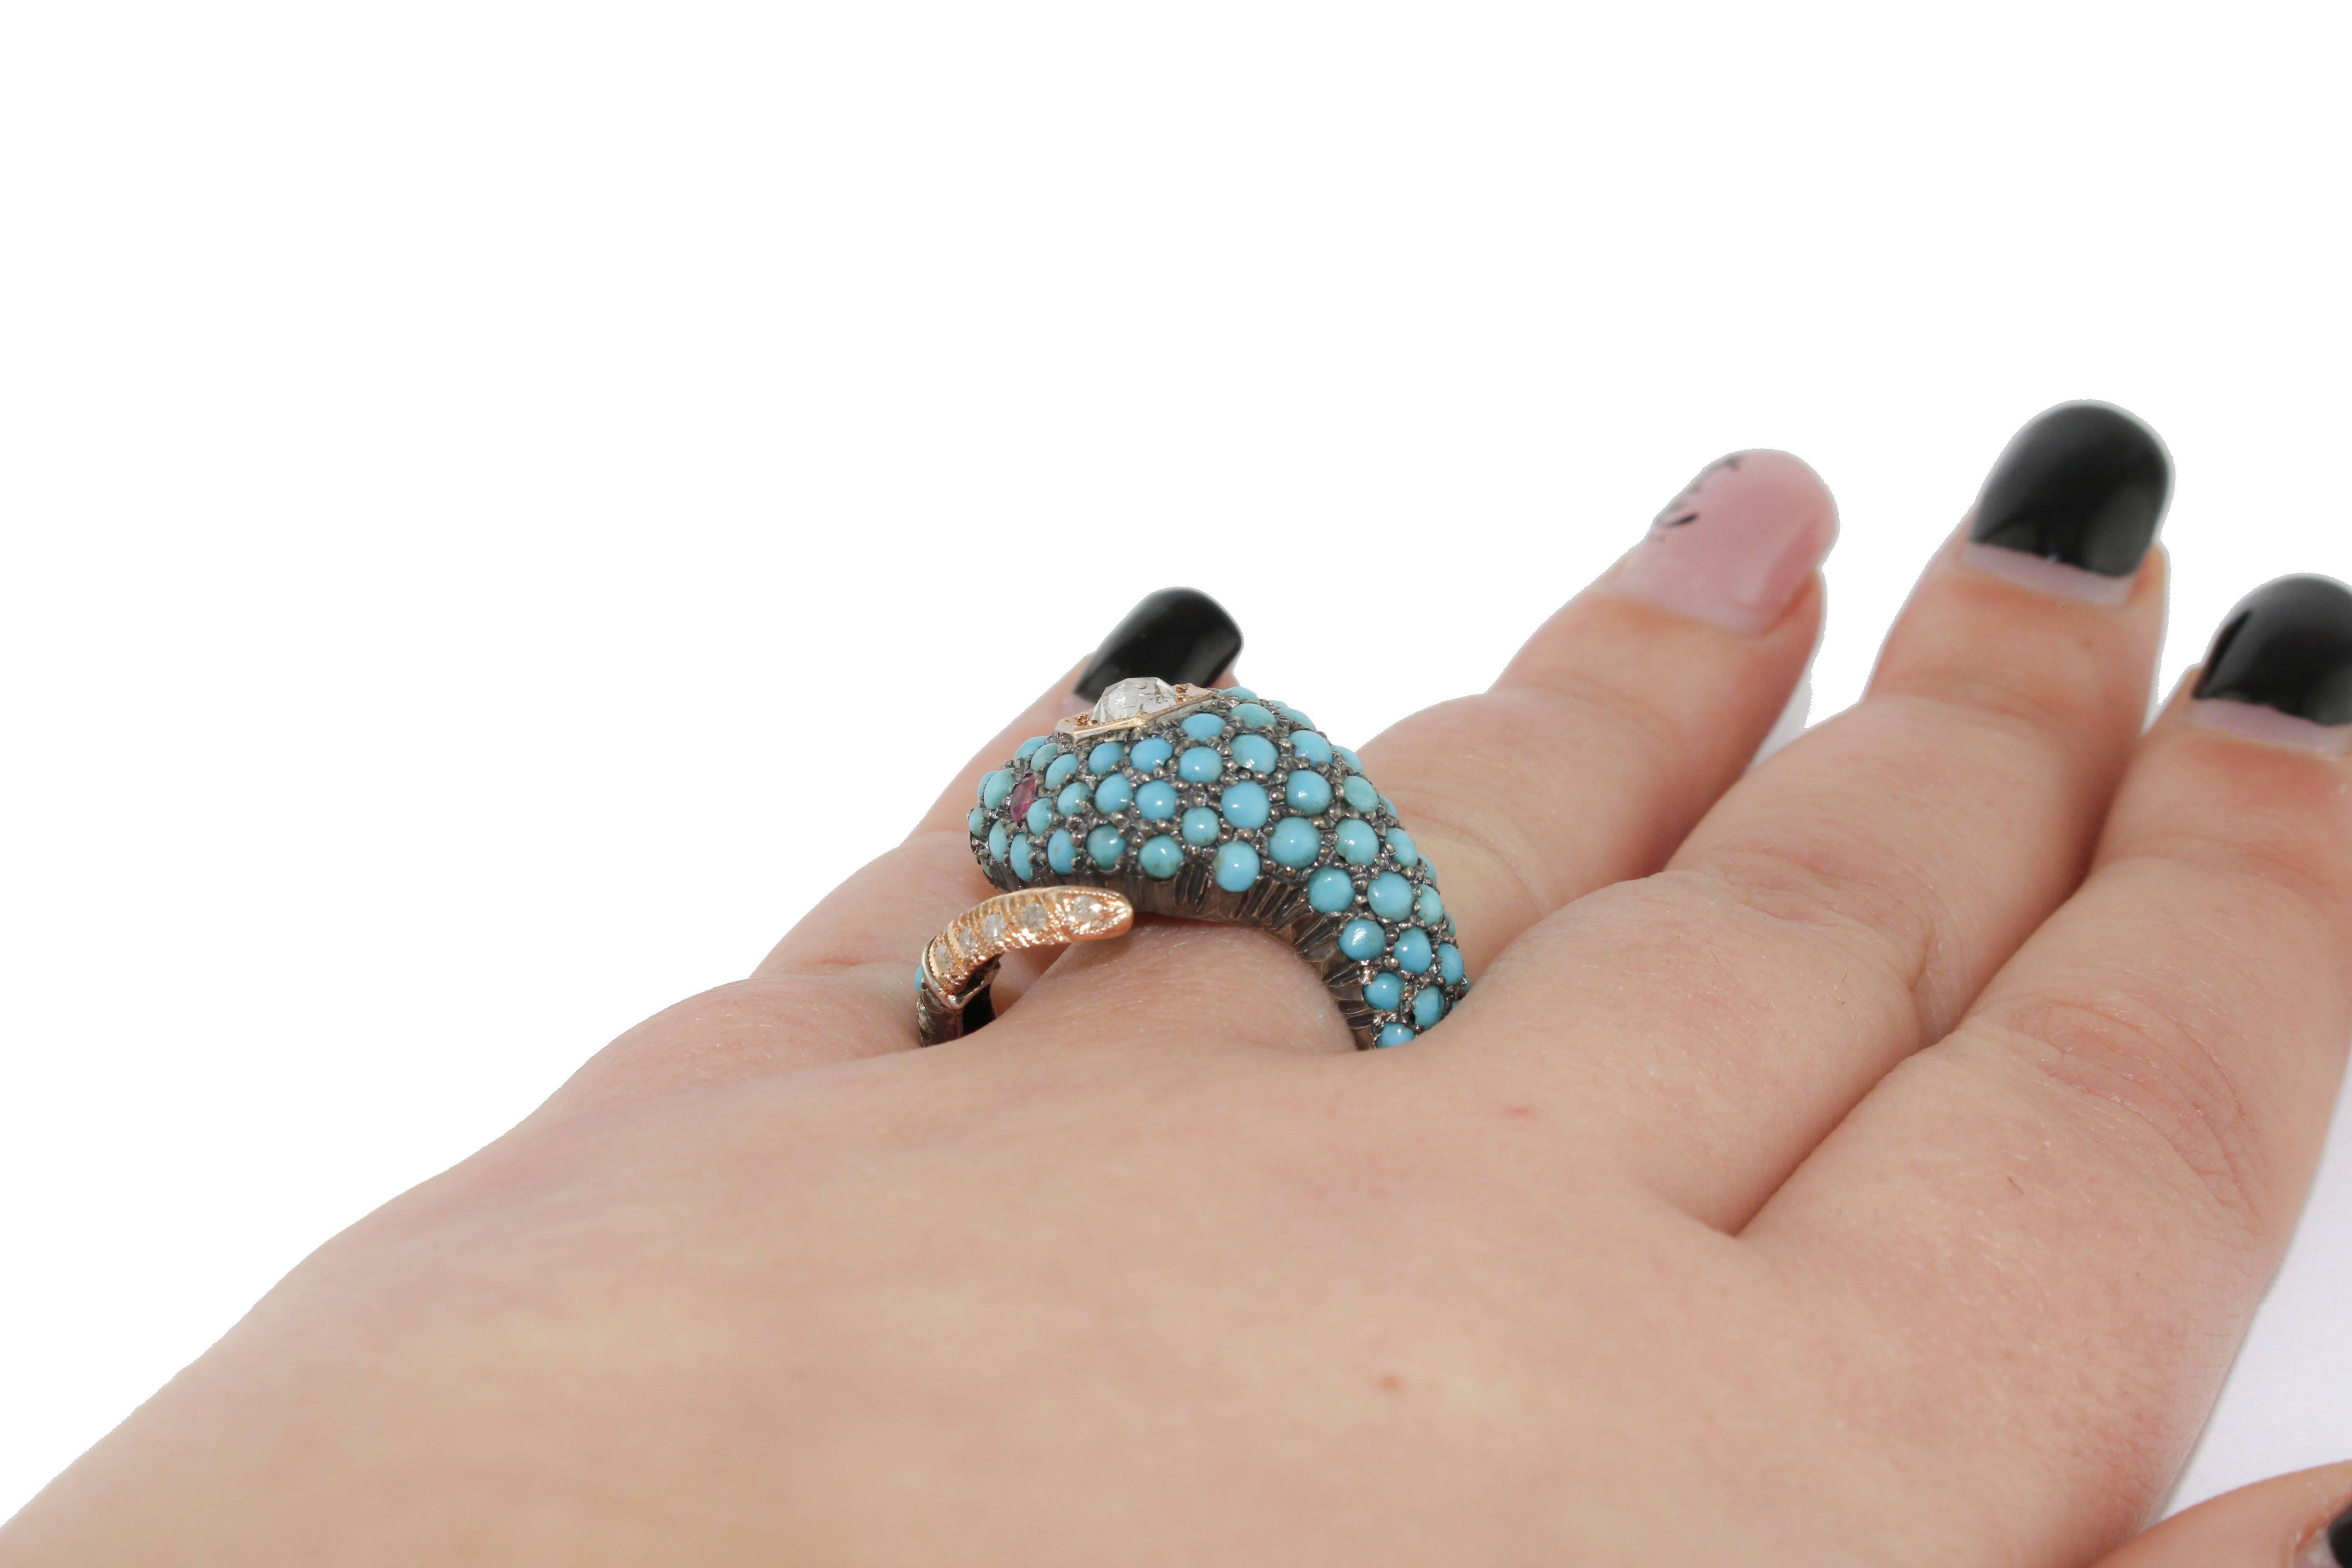  Diamonds Rubies Turquoise  Rose and Silver Gold Snake Ring 1